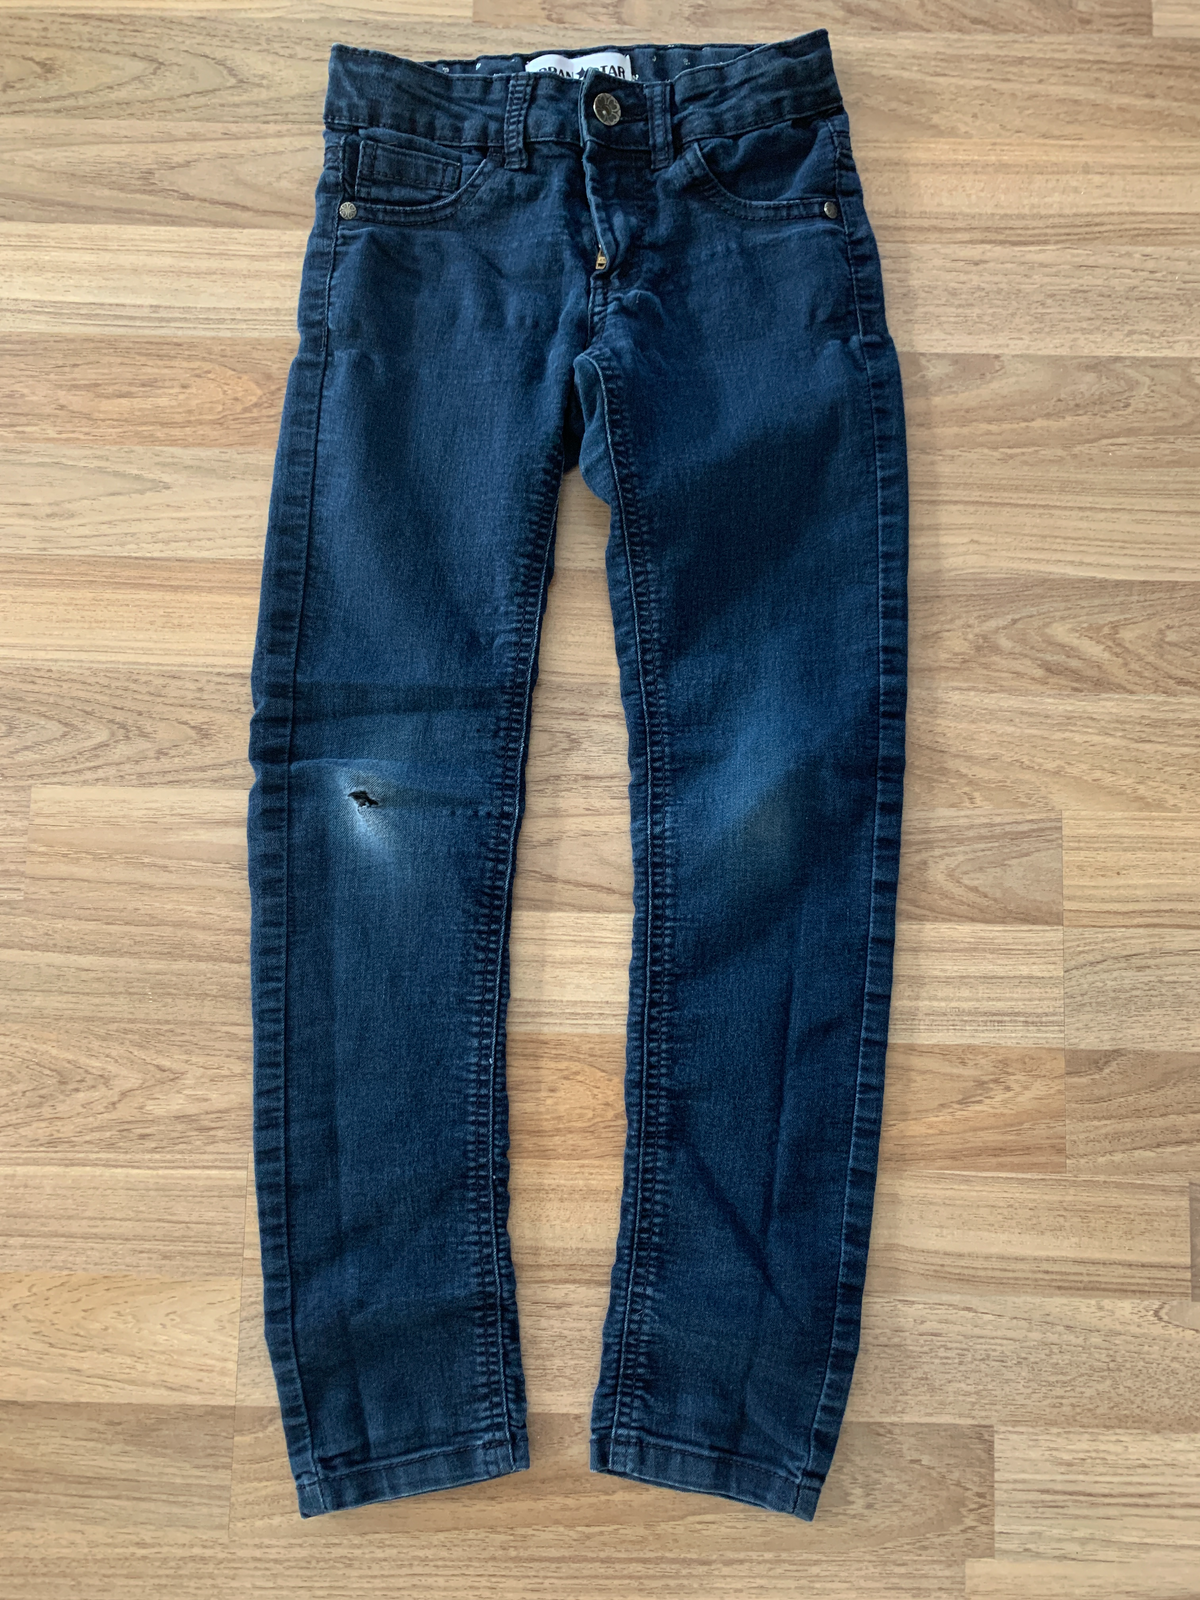 Jeans (Girls Size 7)